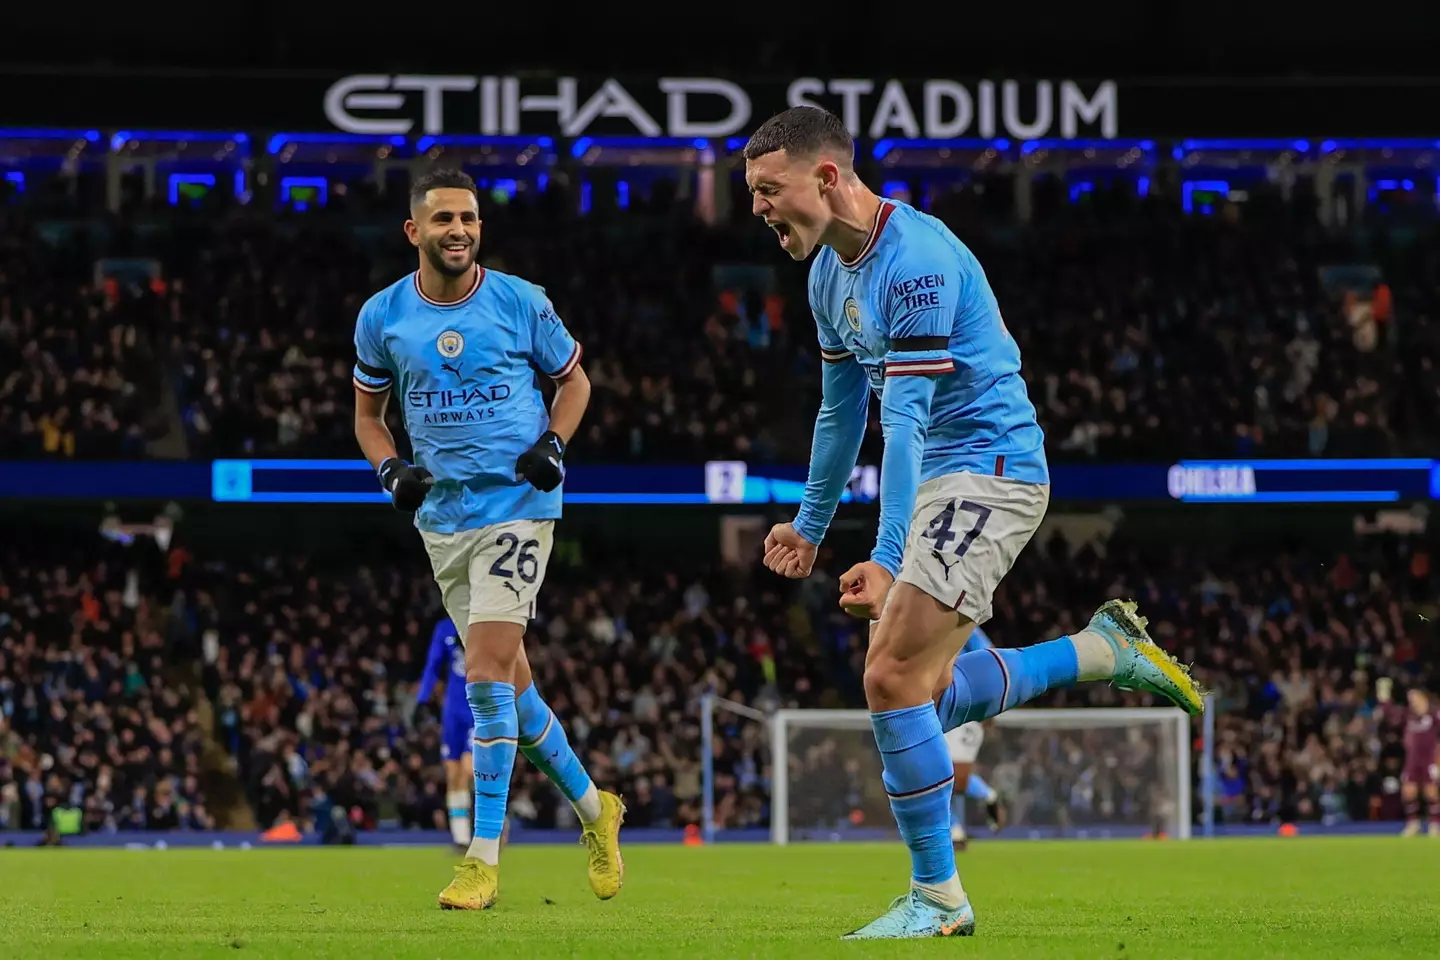 Foden celebrates scoring against Chelsea in the FA Cup. Image: Alamy